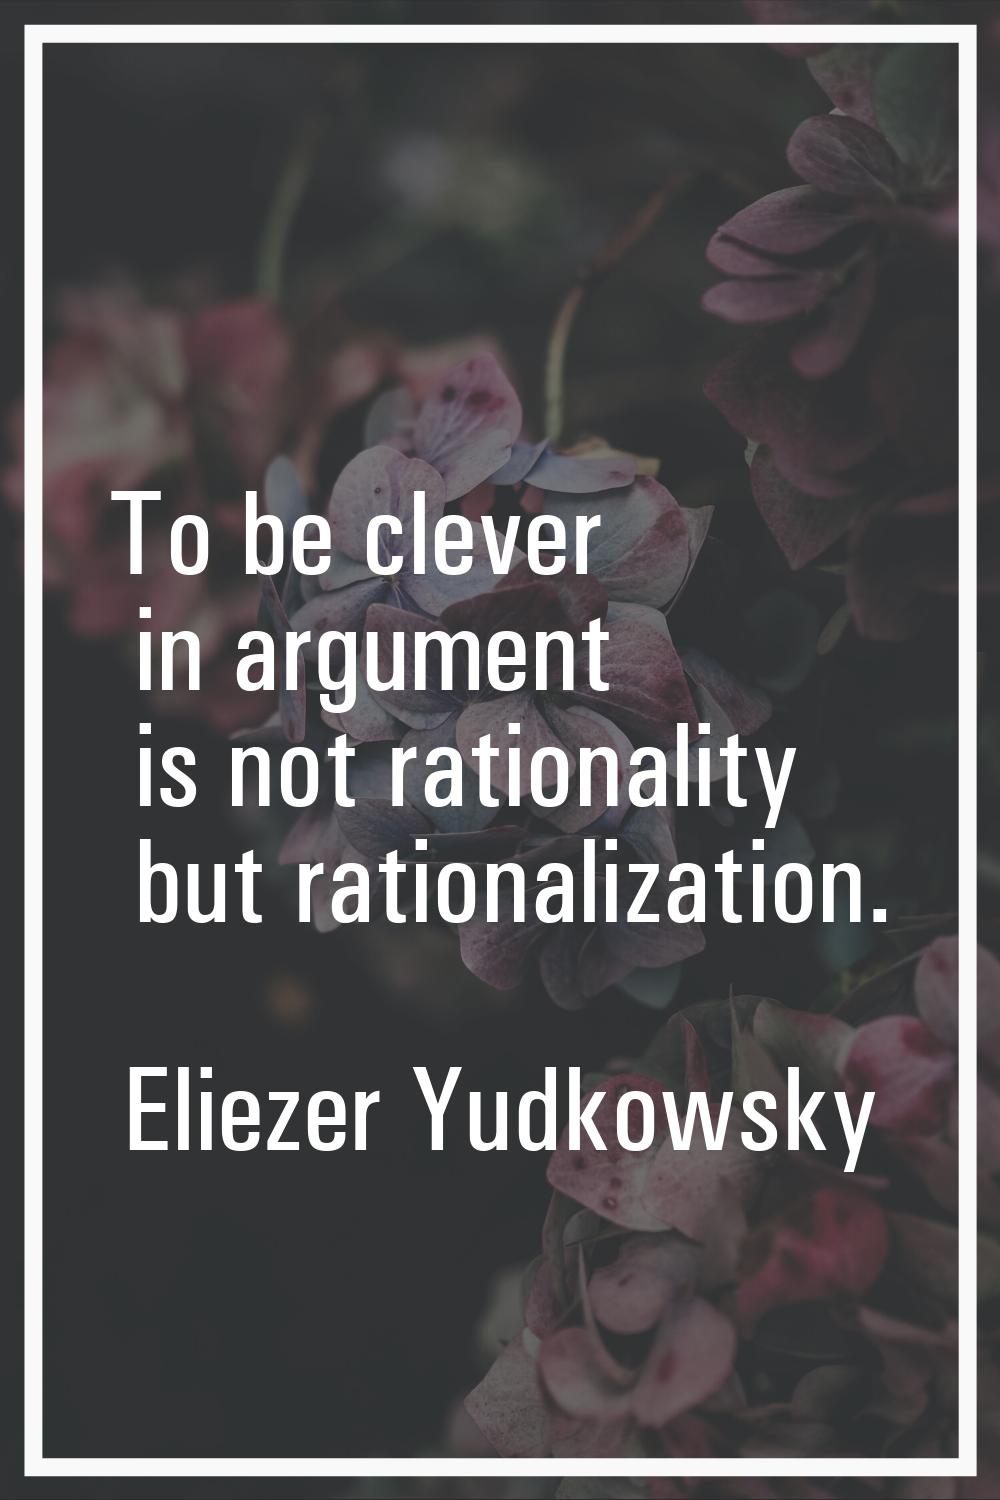 To be clever in argument is not rationality but rationalization.